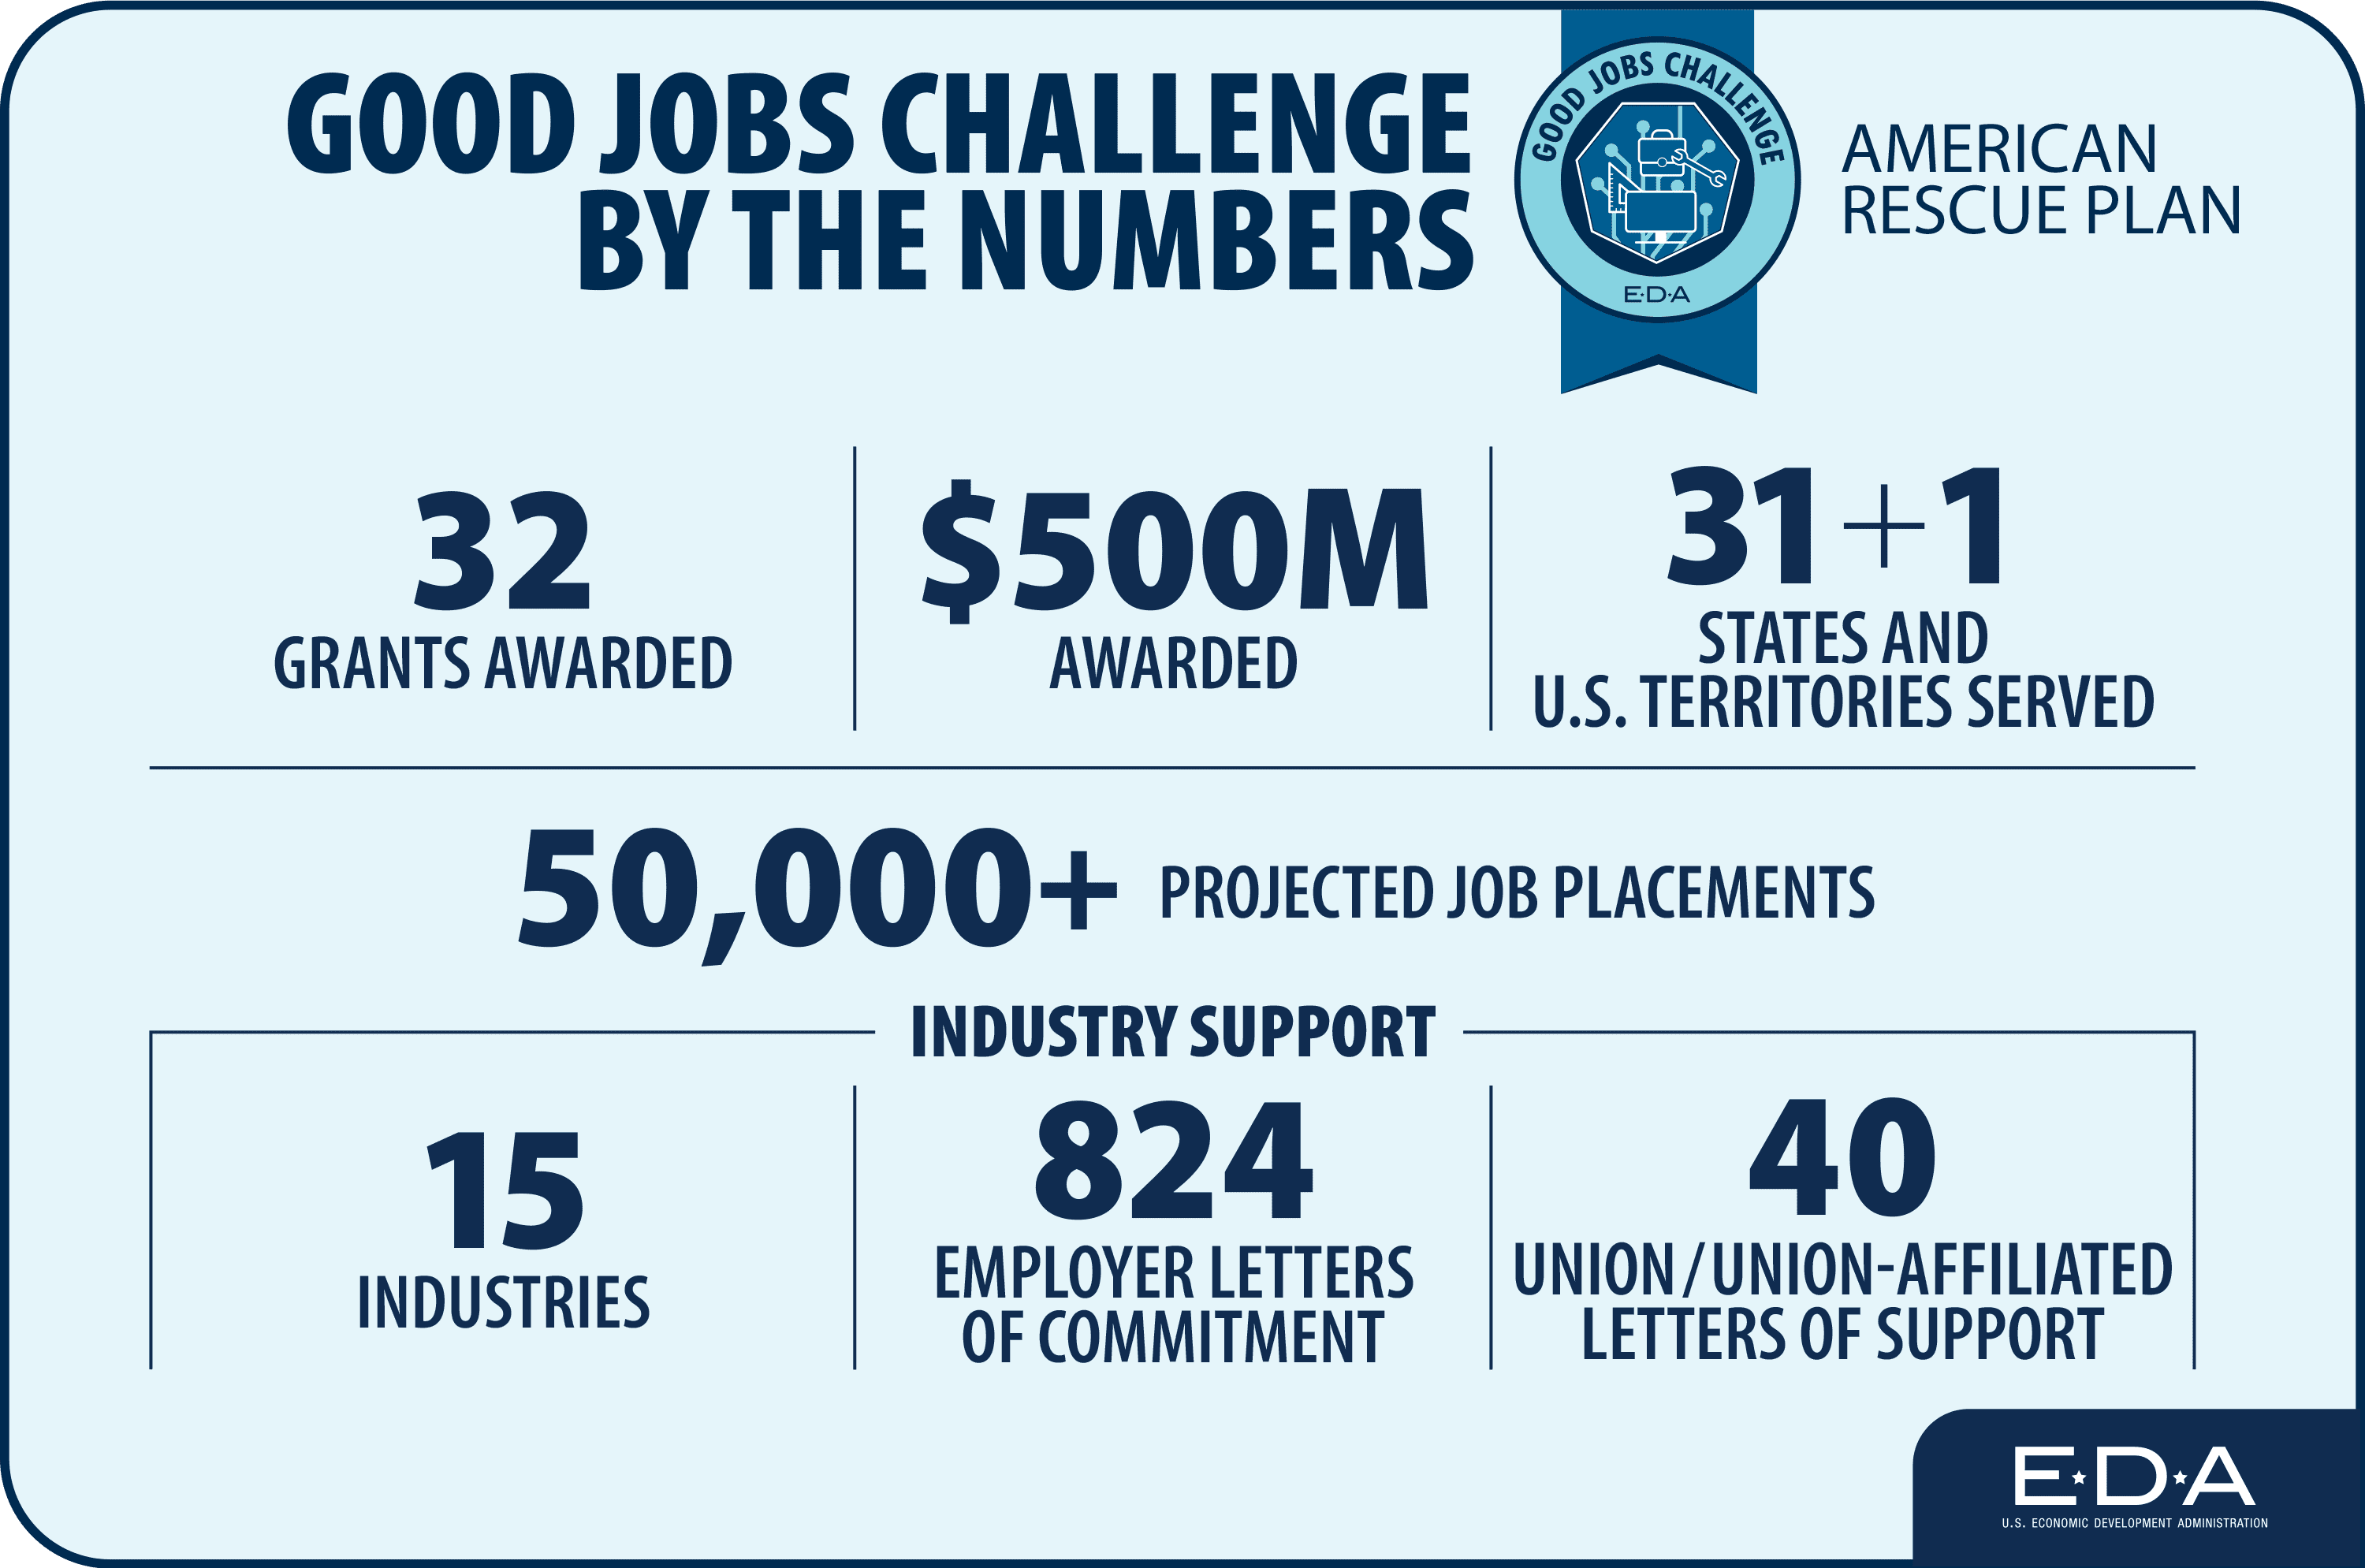 Third Sector joins teams in Massachusetts and Texas to implement workforce programs through the U.S. Department of Commerce's Good Job Challenge